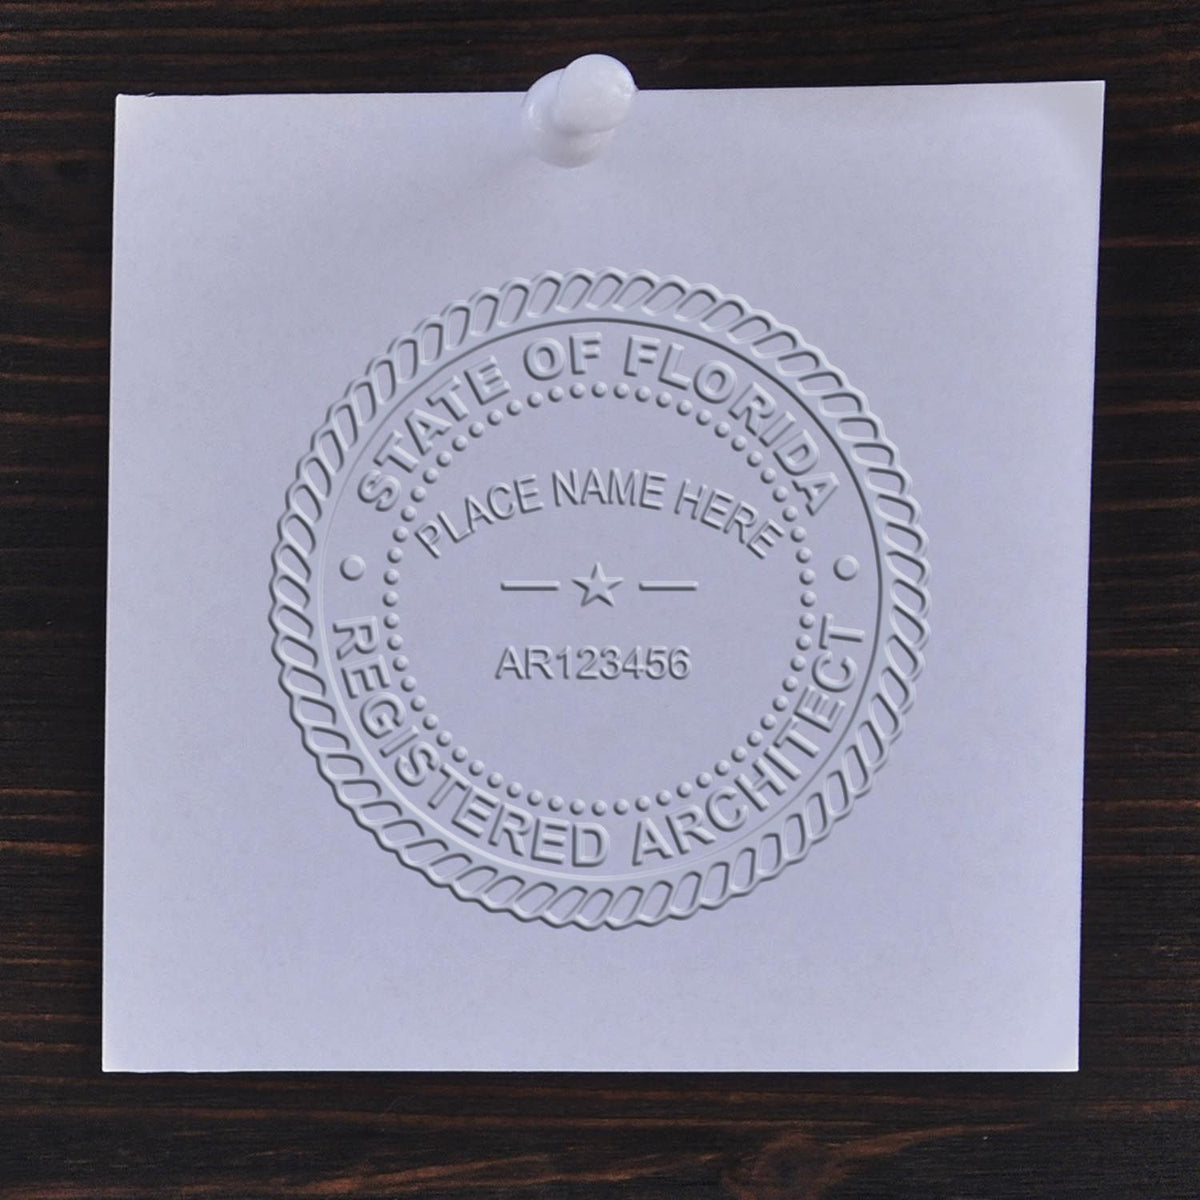 An alternative view of the State of Florida Long Reach Architectural Embossing Seal stamped on a sheet of paper showing the image in use